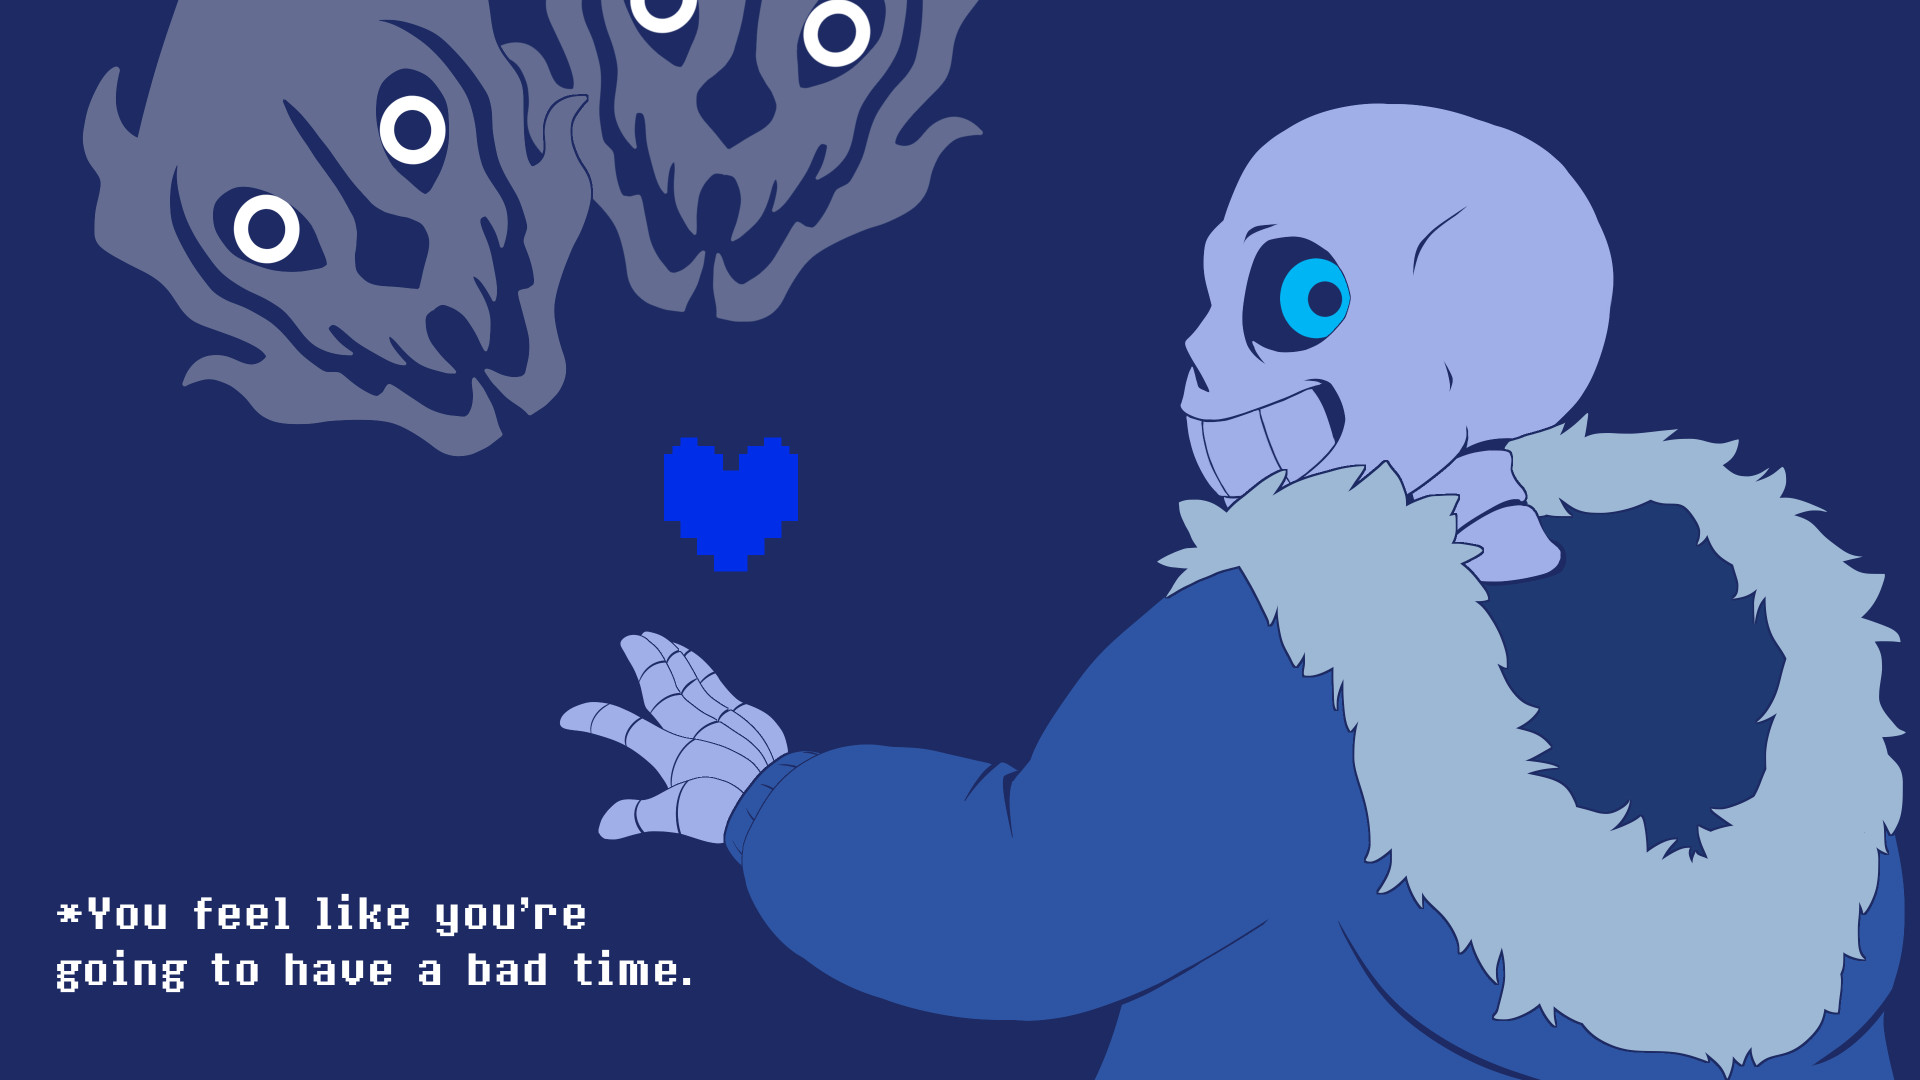 Sans gives you a bad time wallpaper edition